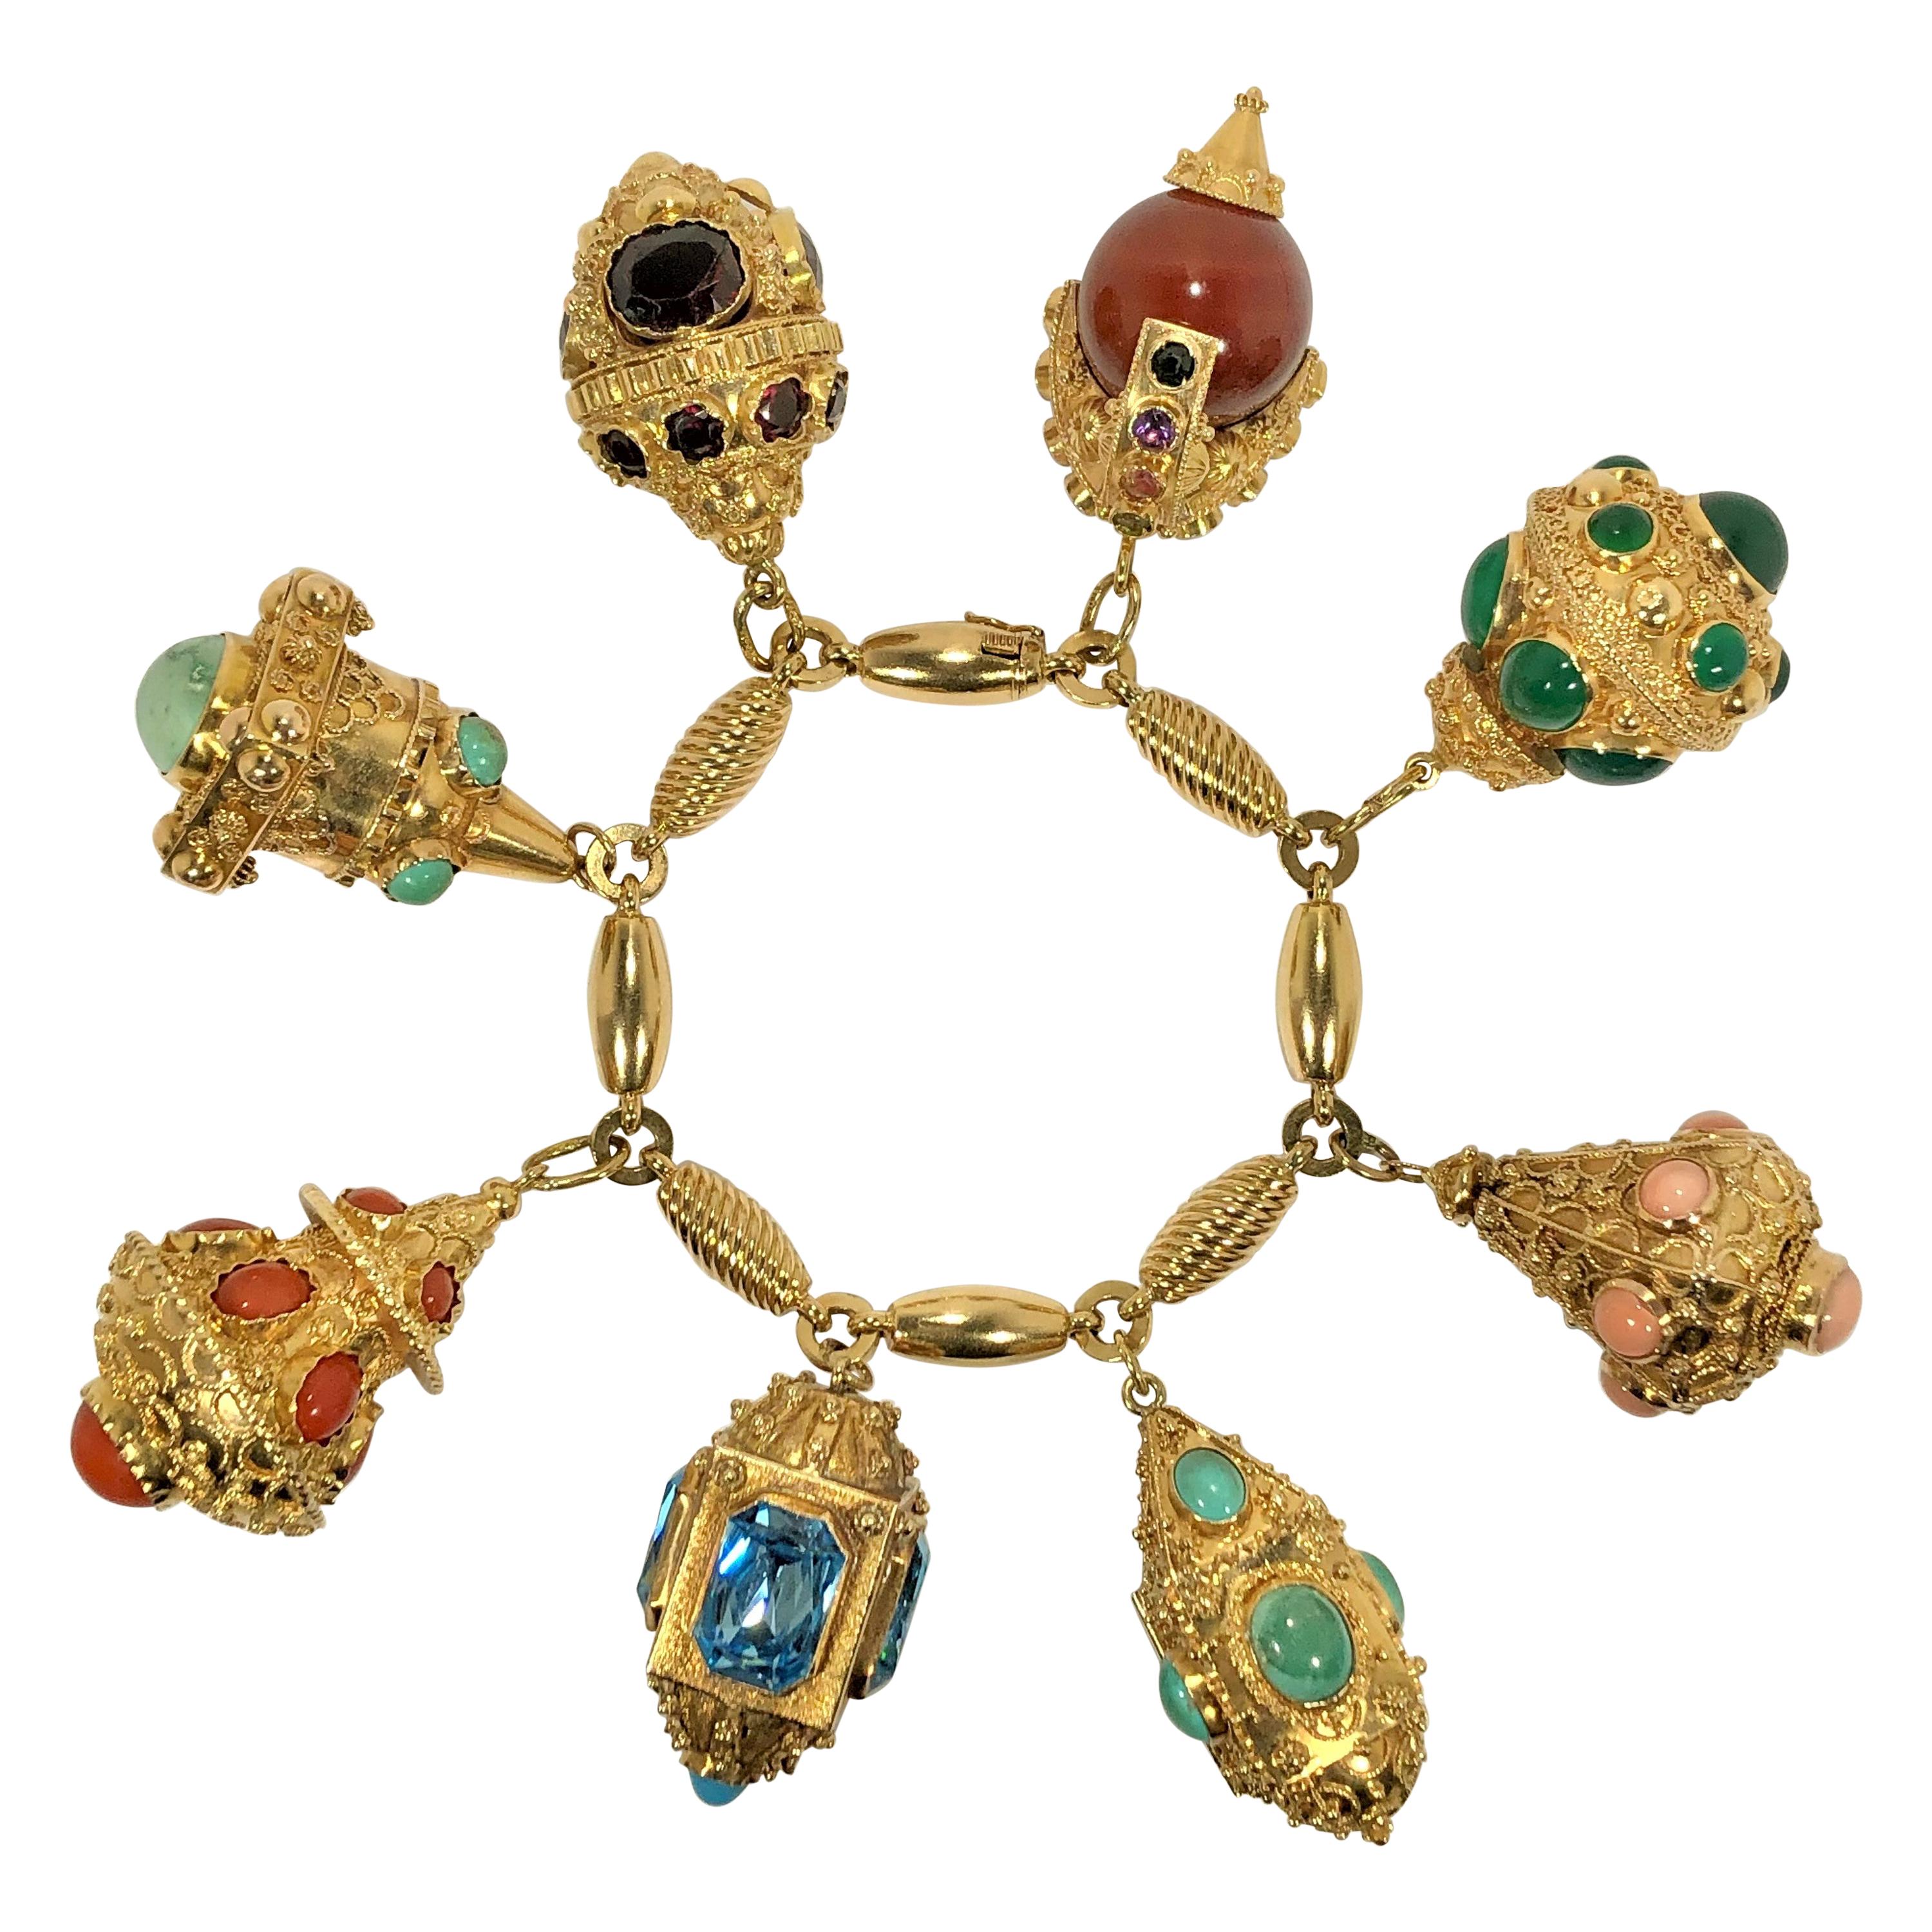 Mid-20th Century Italian Etruscan Revival Charm Bracelet- 8 Charms For Sale